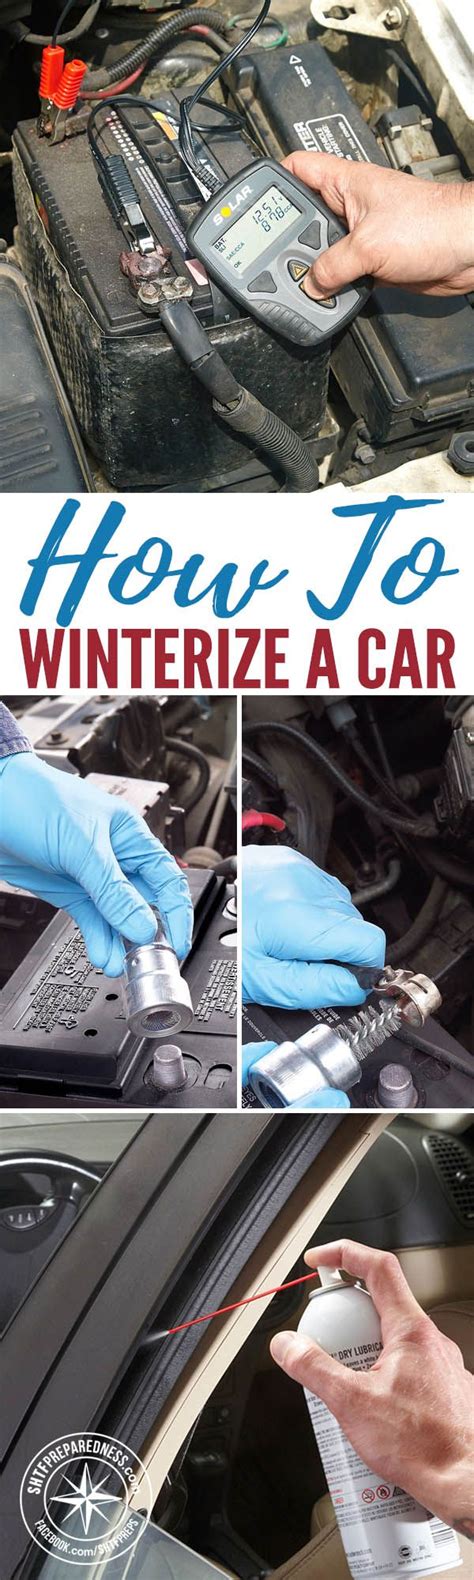 How To Winterize A Car Winter Camping Gear Winter Car Engine Repair